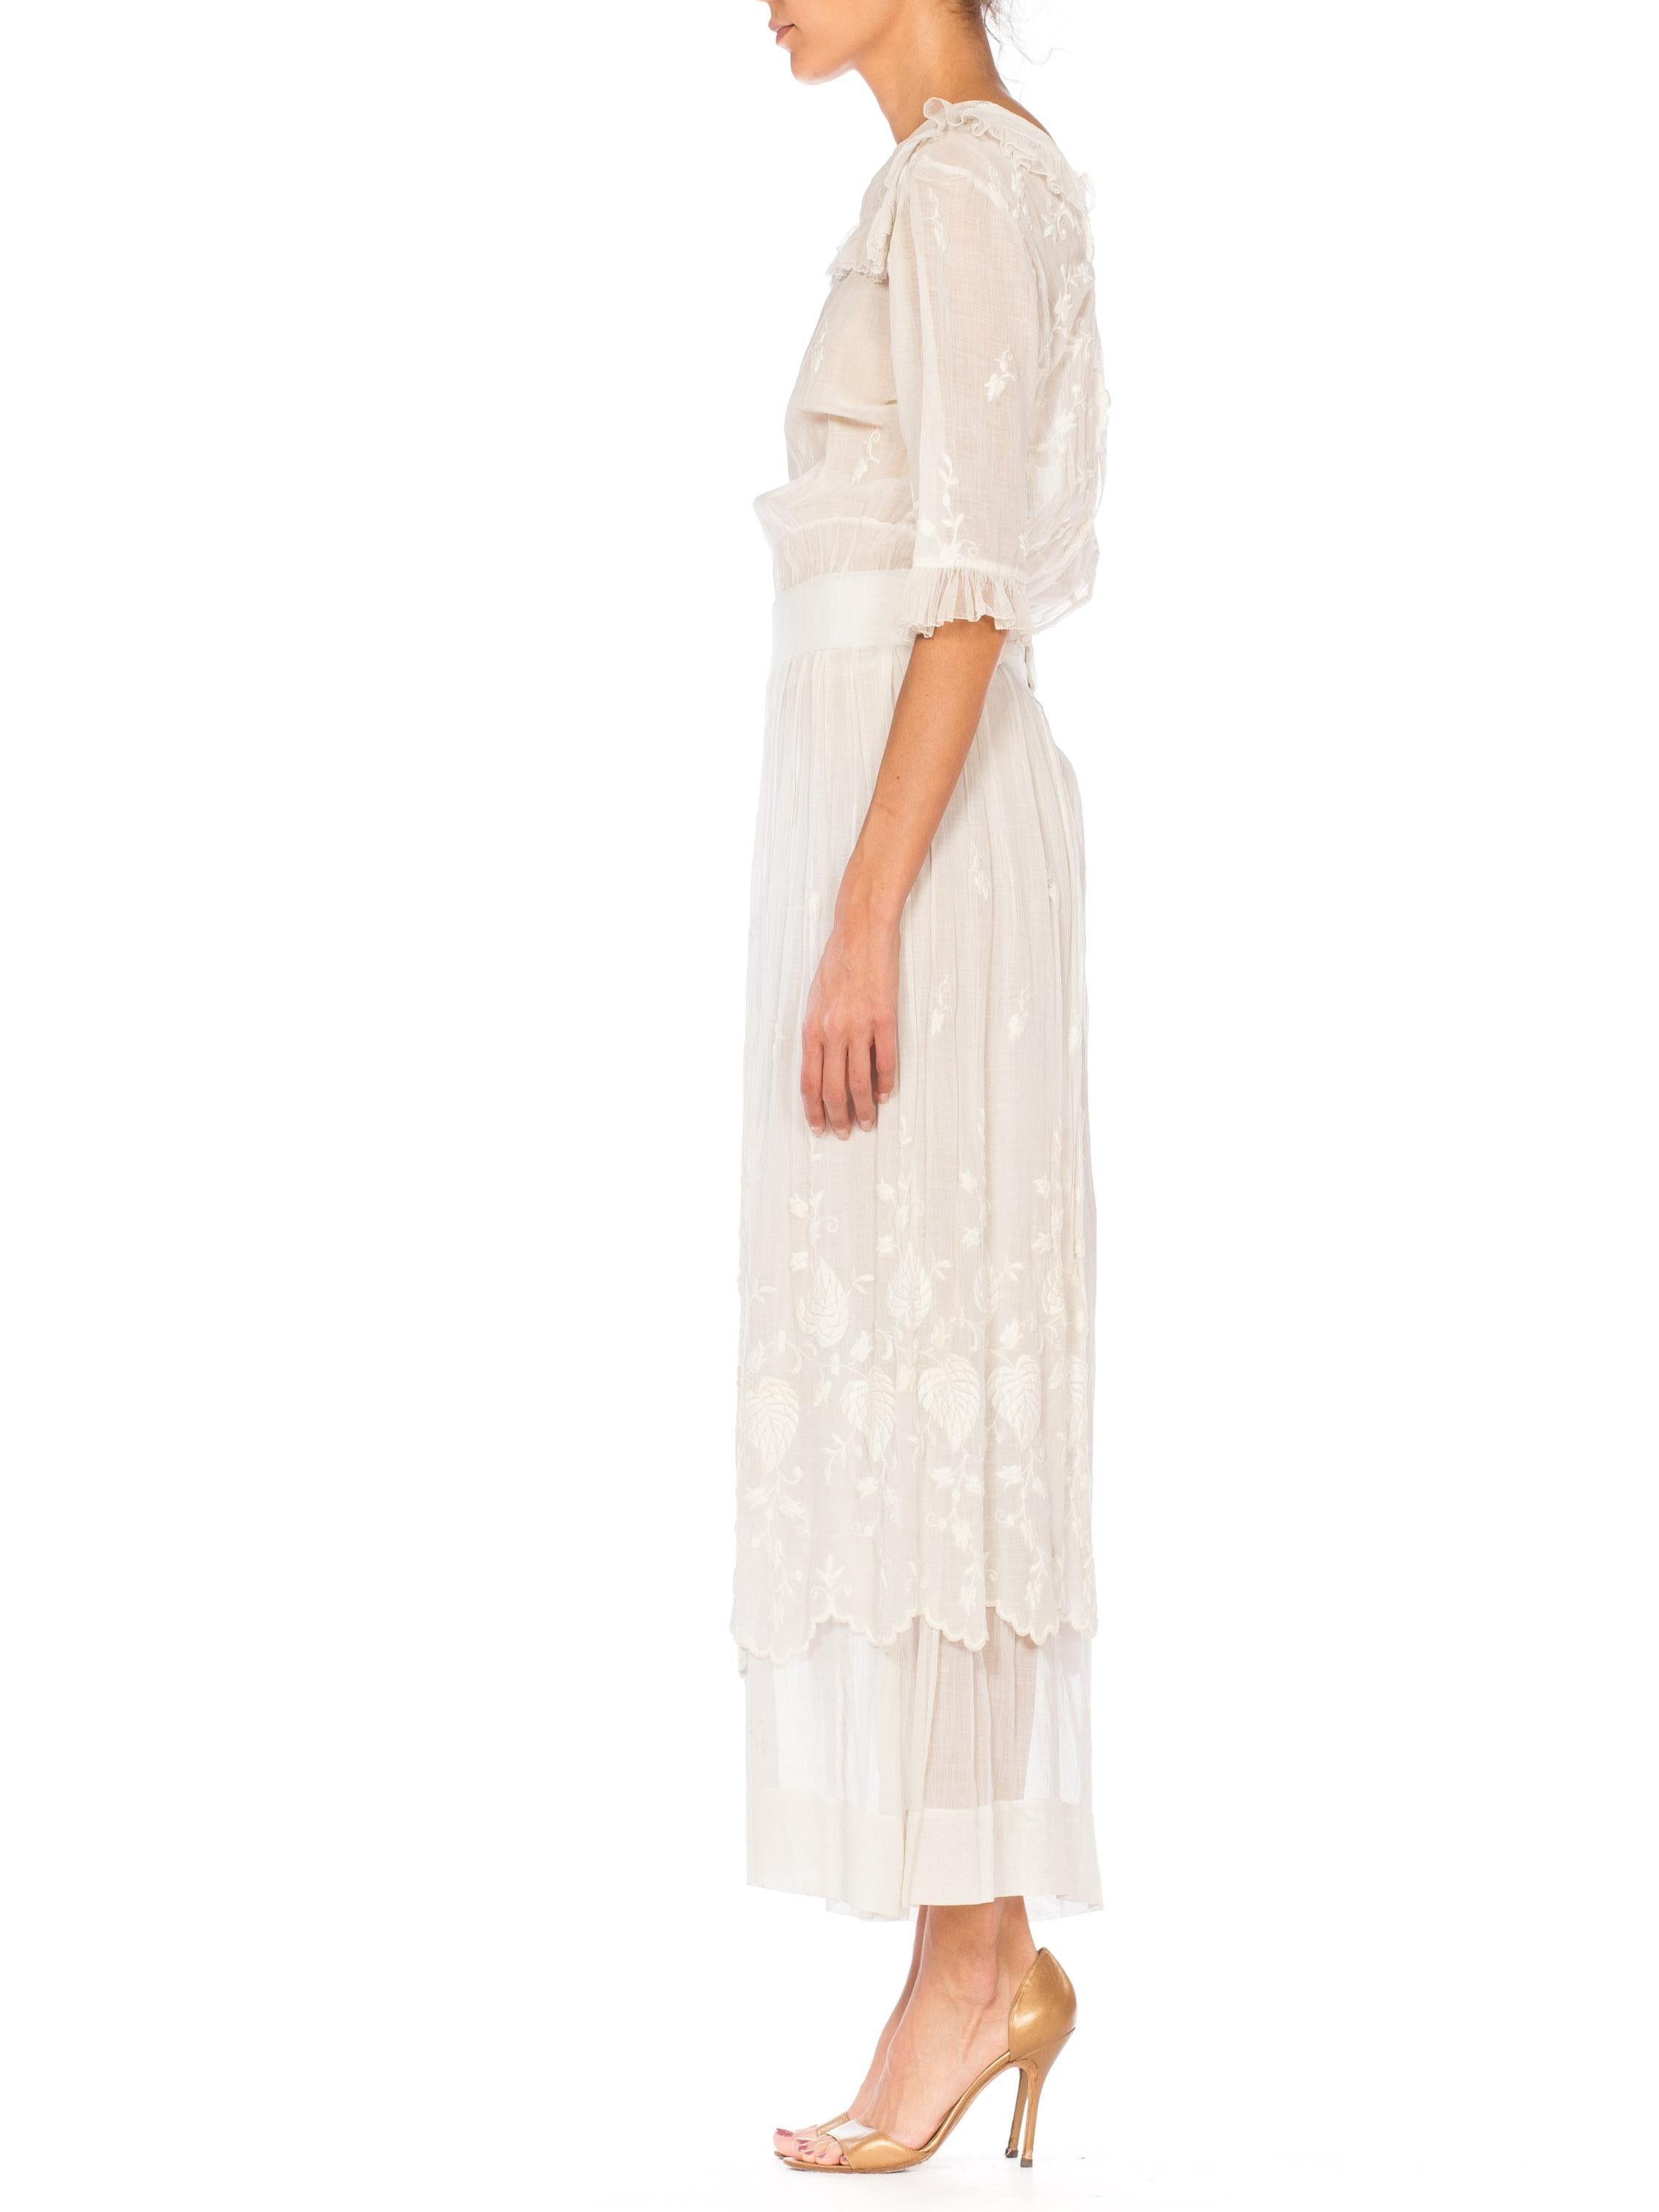 Women's 1910S White Embroidered Cotton Voile Edwardian Tea Dress With Sleeves For Sale